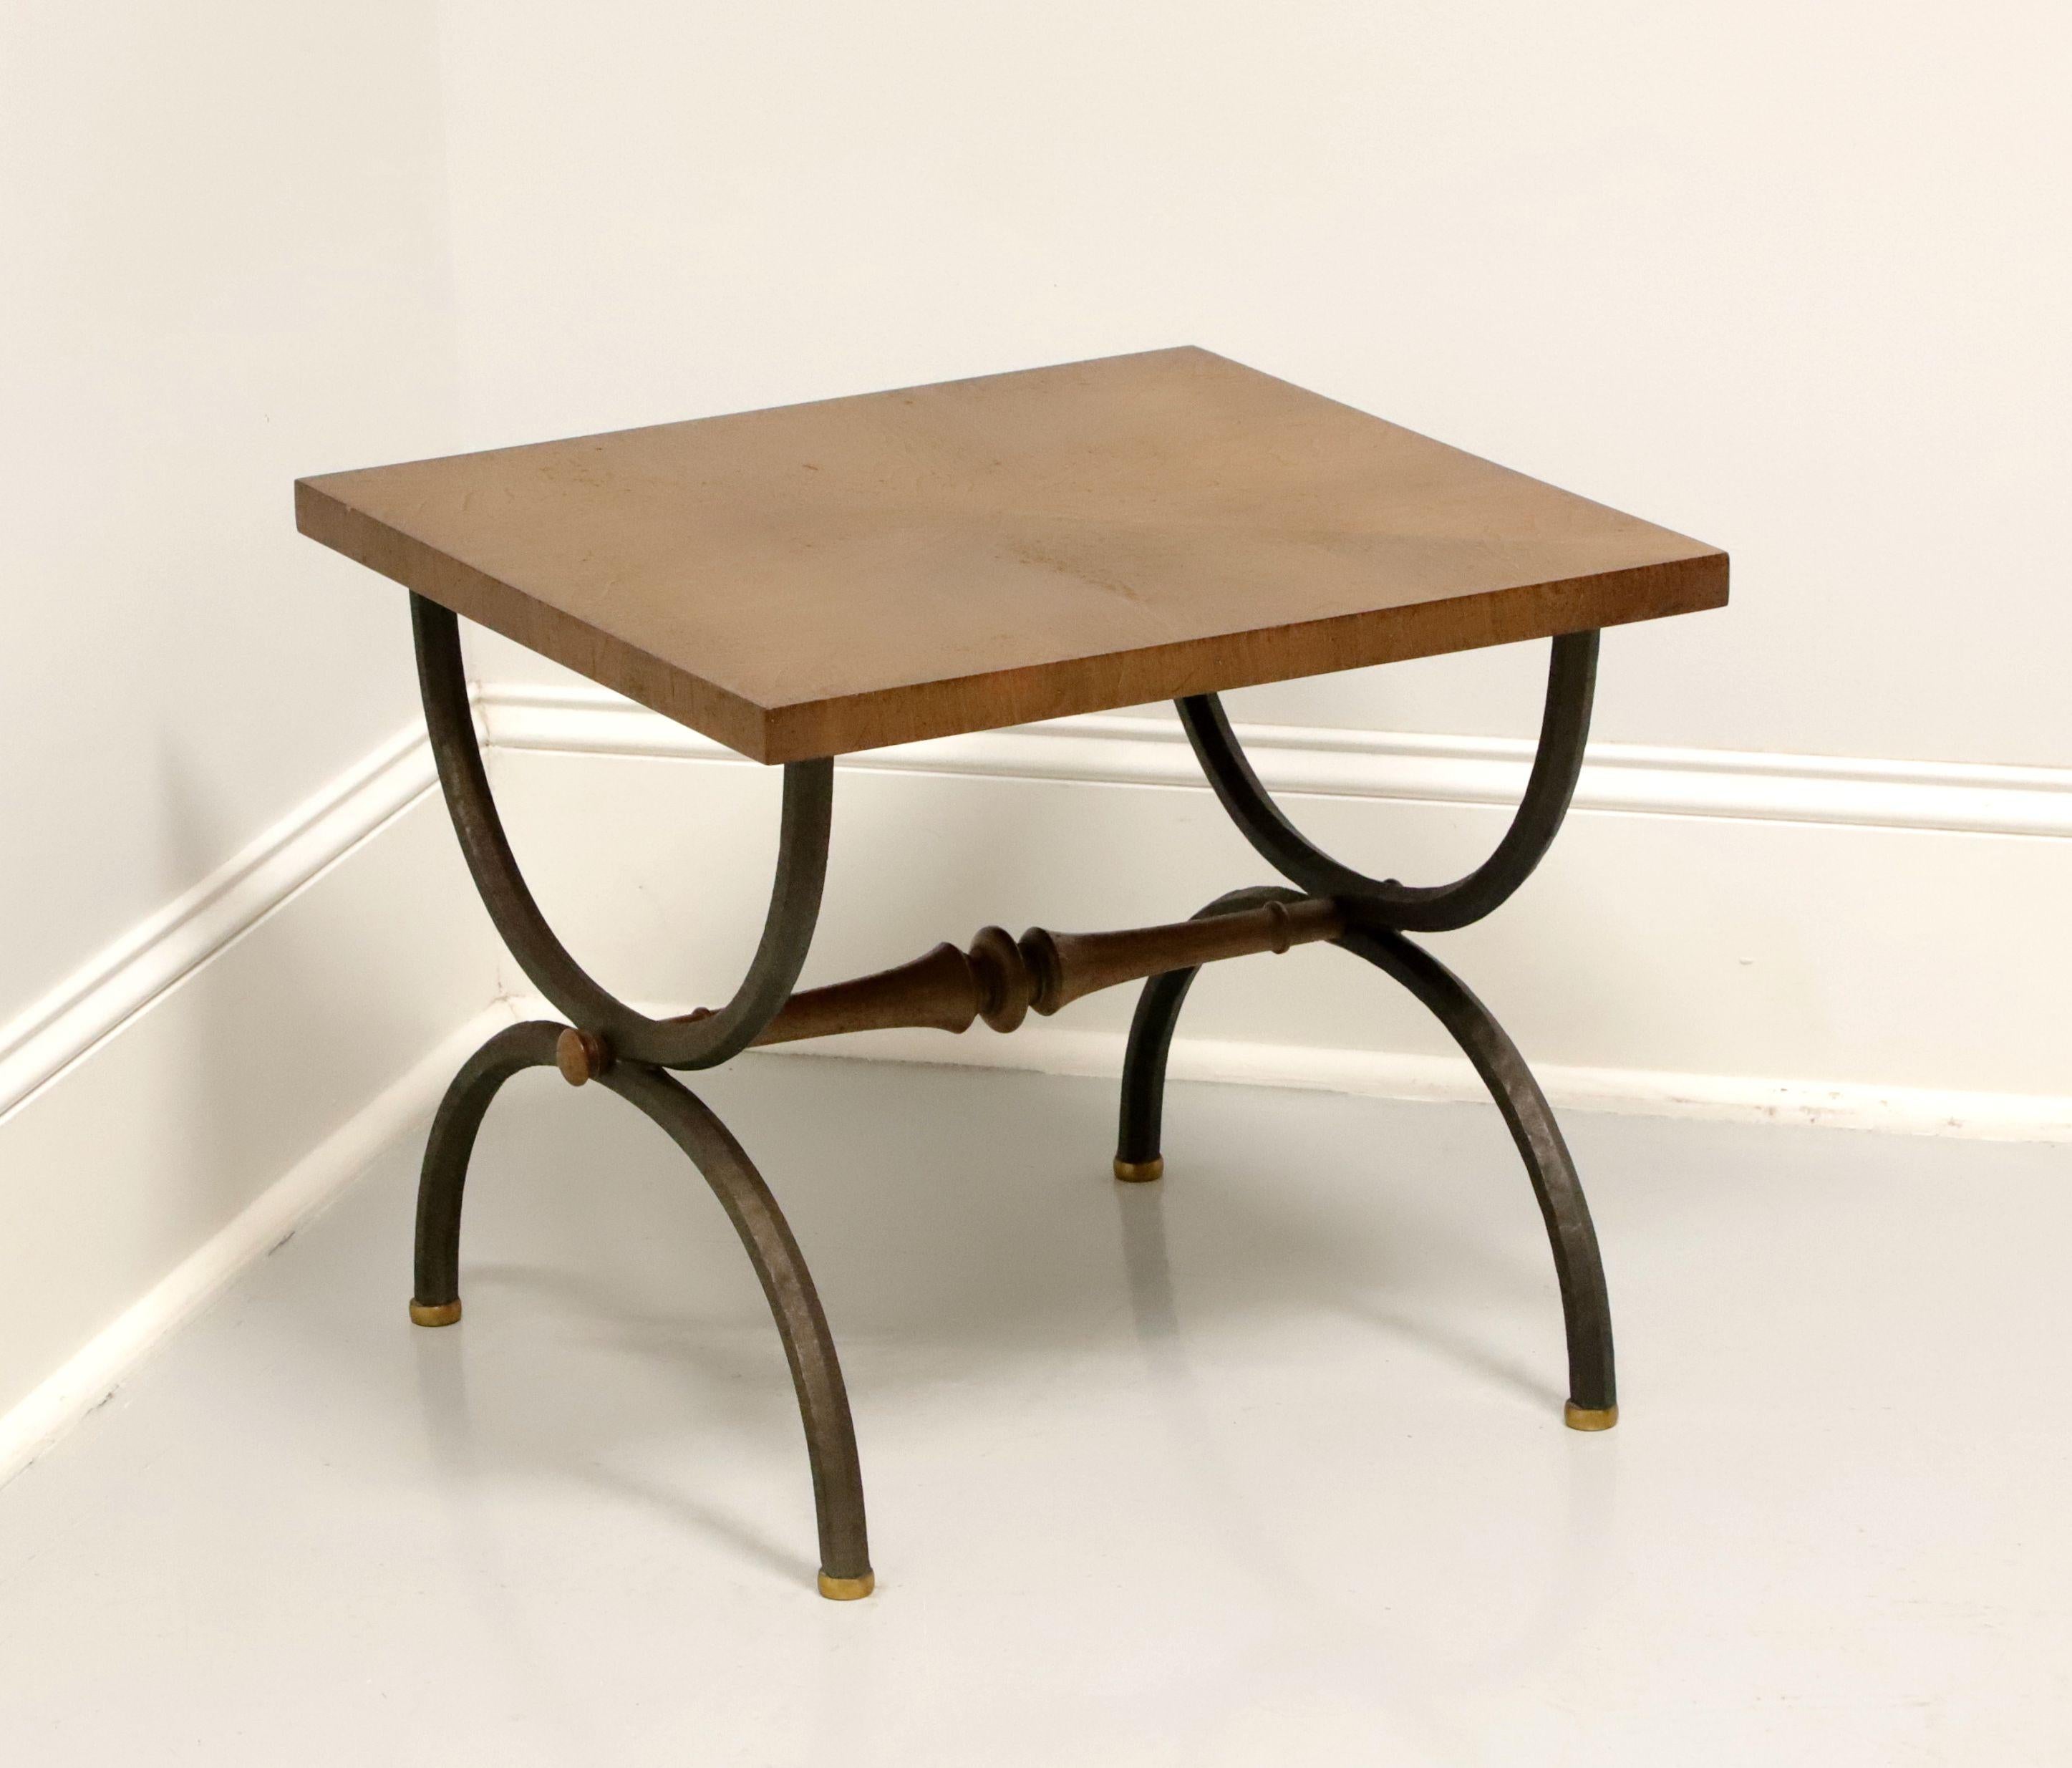 TOMLINSON 1960's Walnut Square Cocktail Table with Metal Legs - B For Sale 2